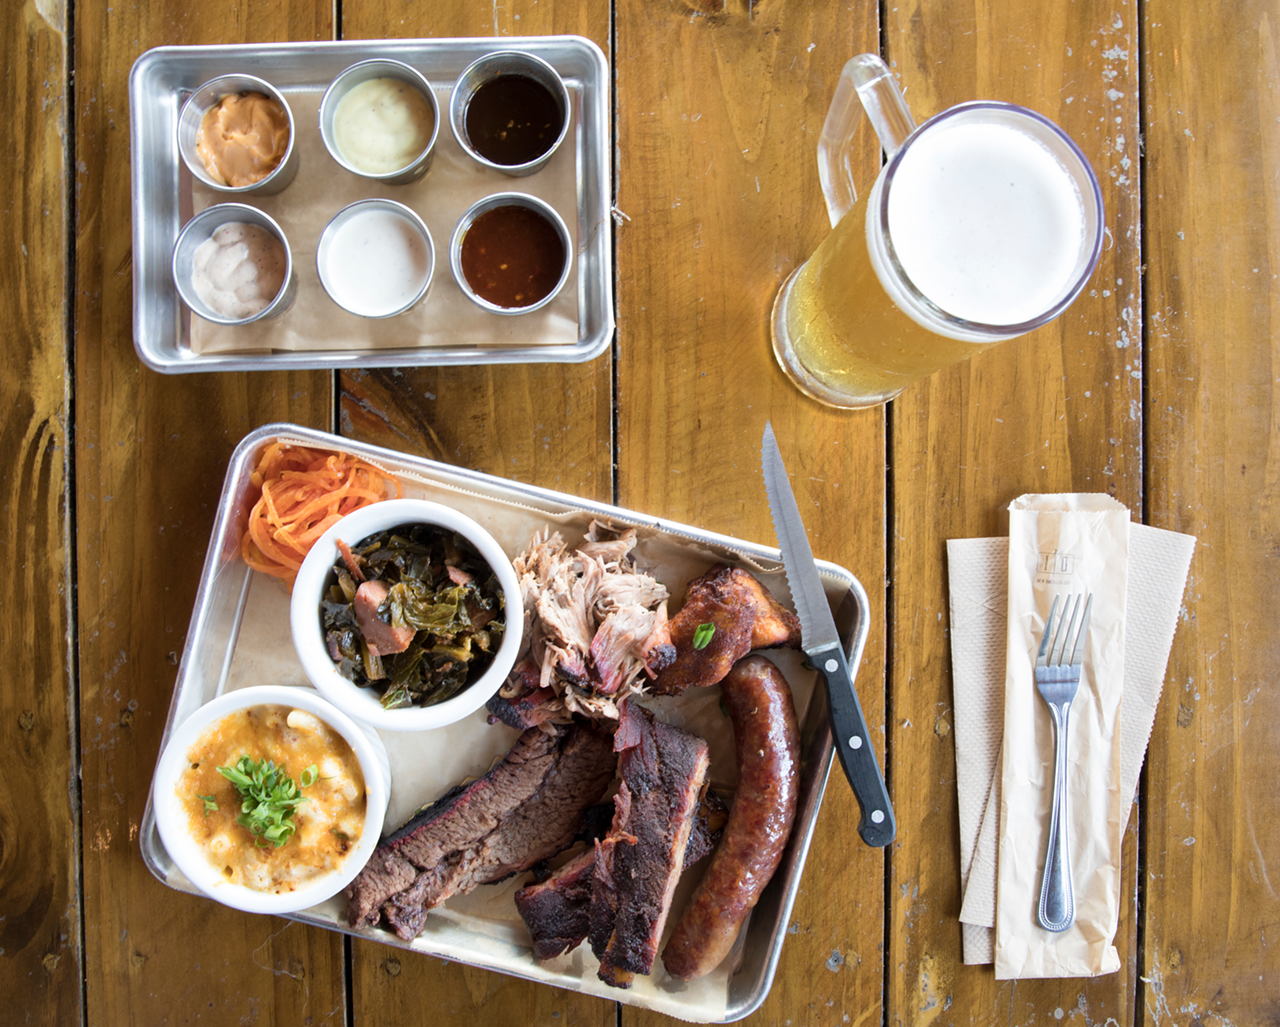 A great way to sample Iron Oak New American BBQ's smoked goodness is to order The Cycle.